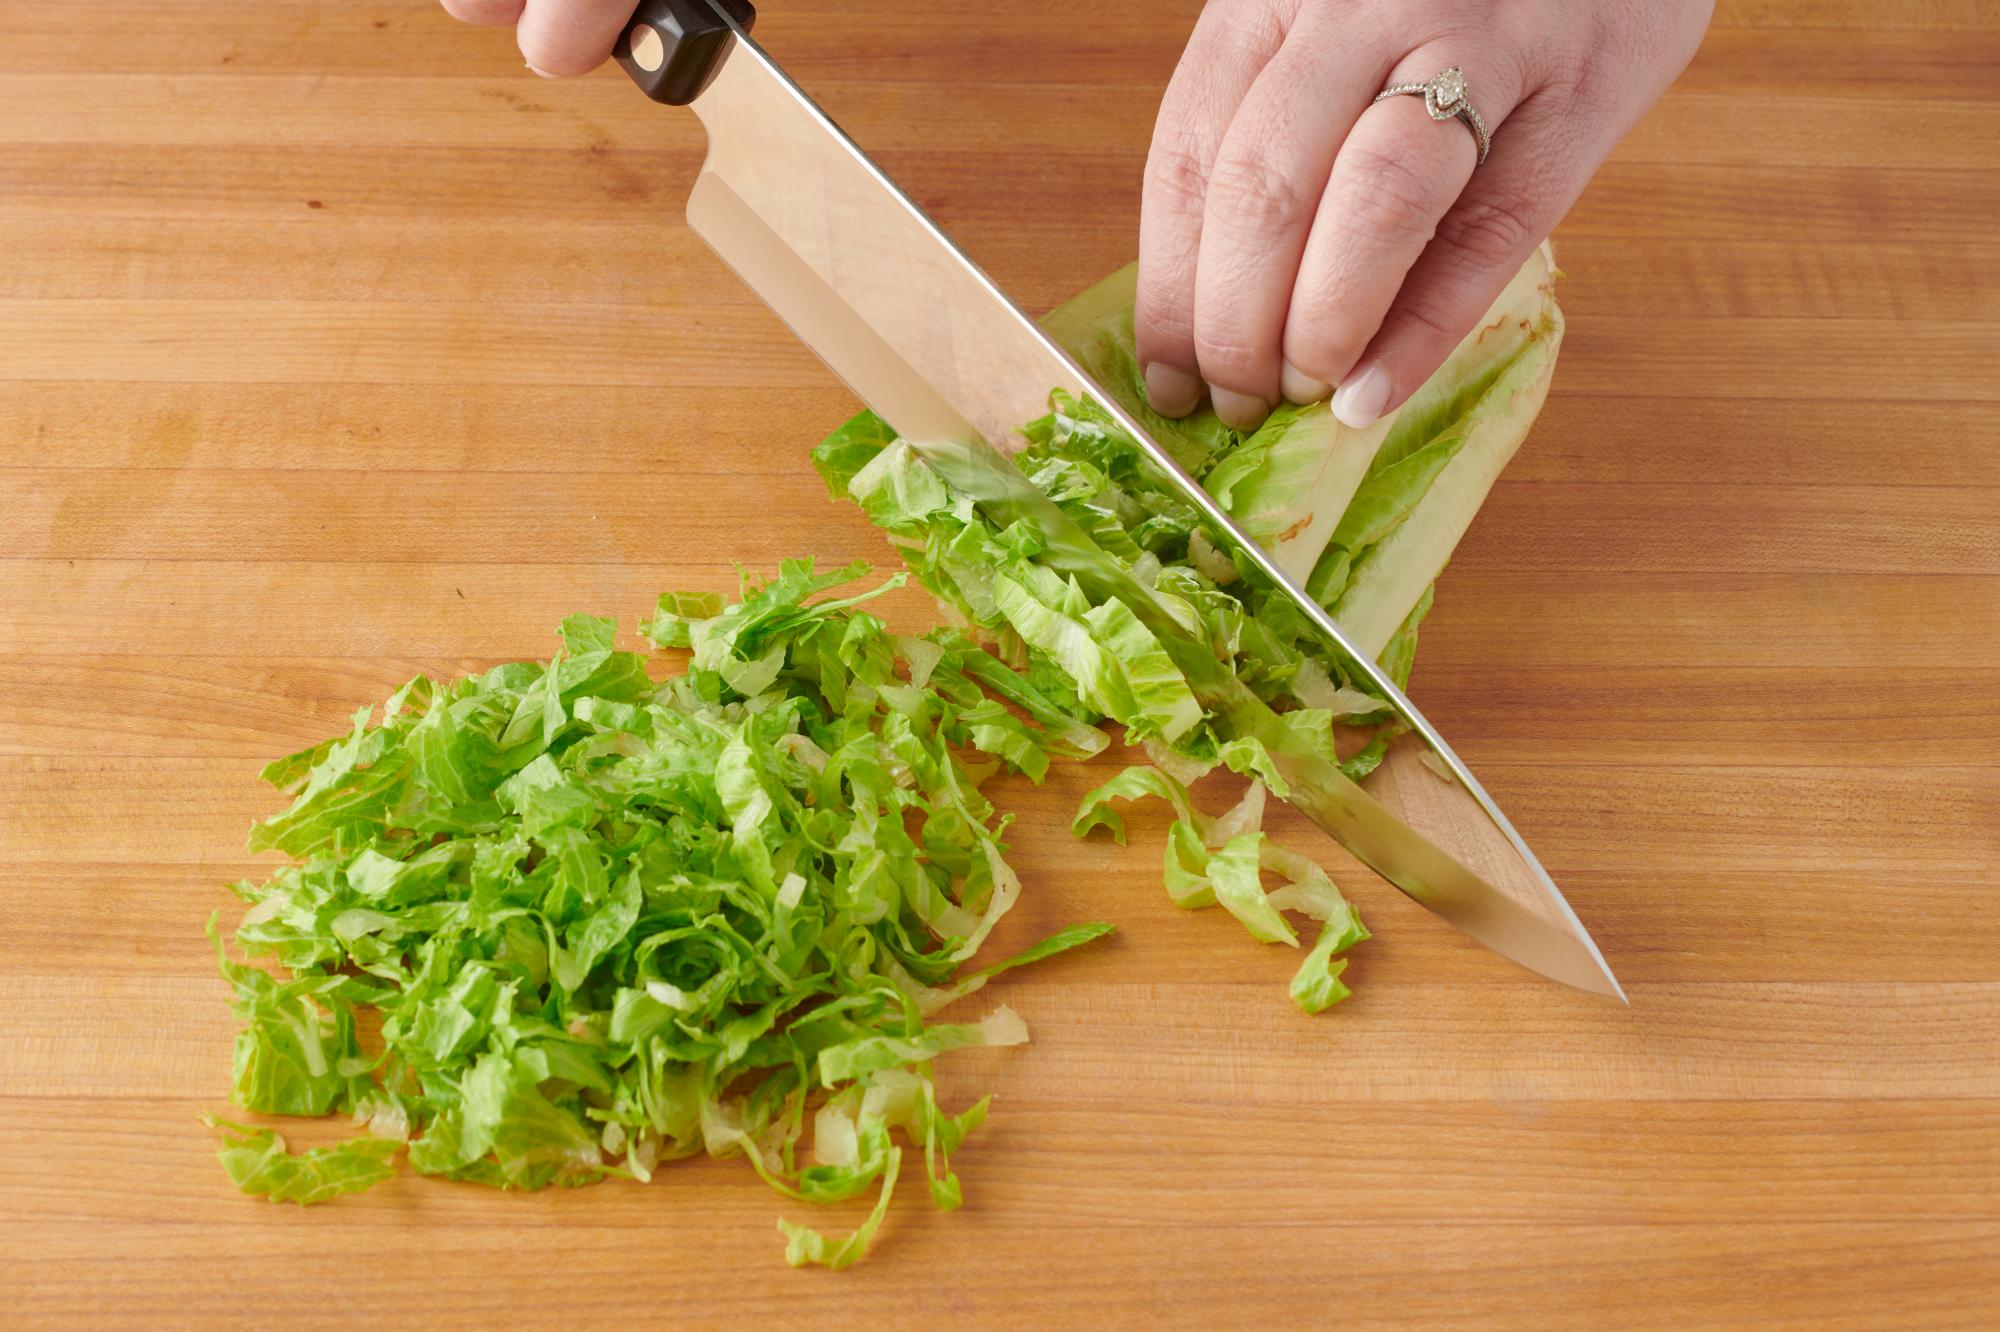 Chopping the romaine lettuce with a French Chef.